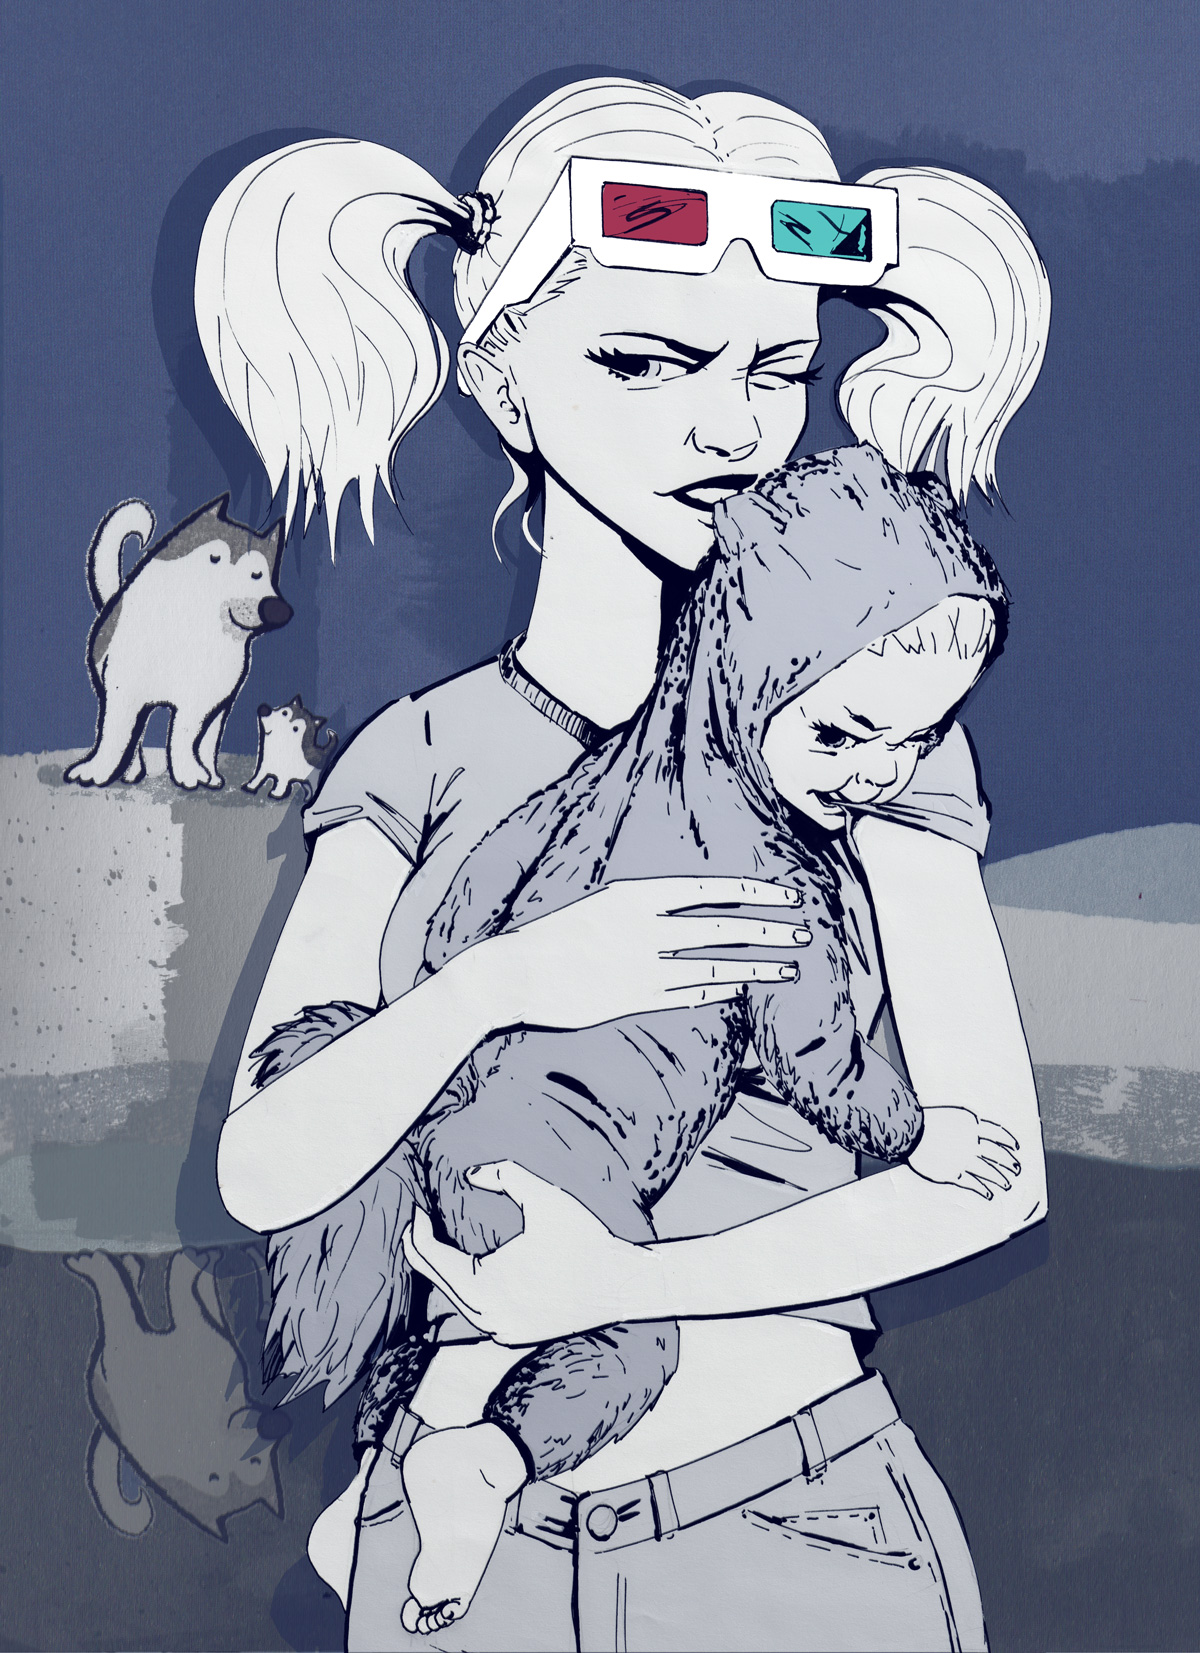 Girl holding an ermine, nibbling on ermines ear